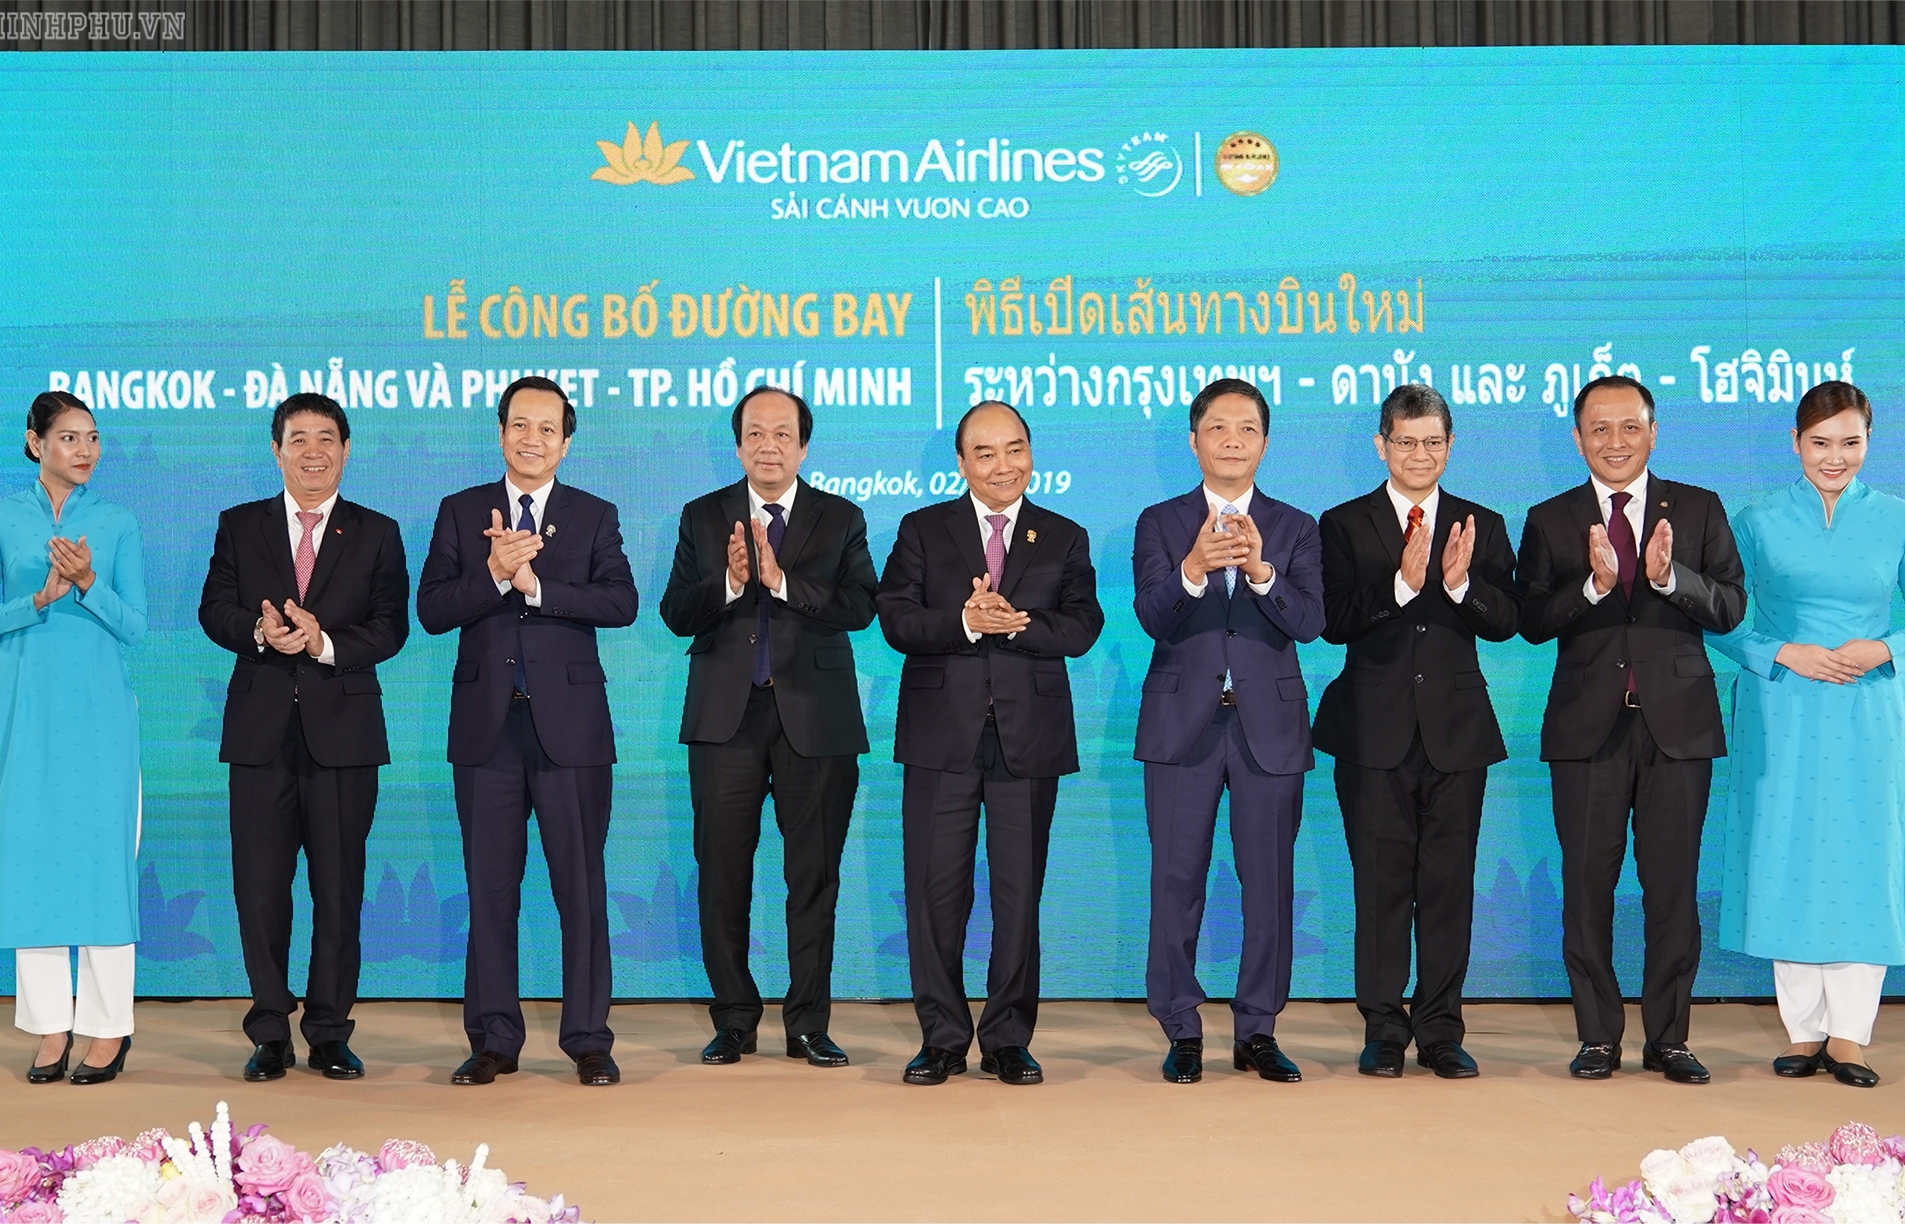 PM attends launching ceremonies for new air routes in Bangkok